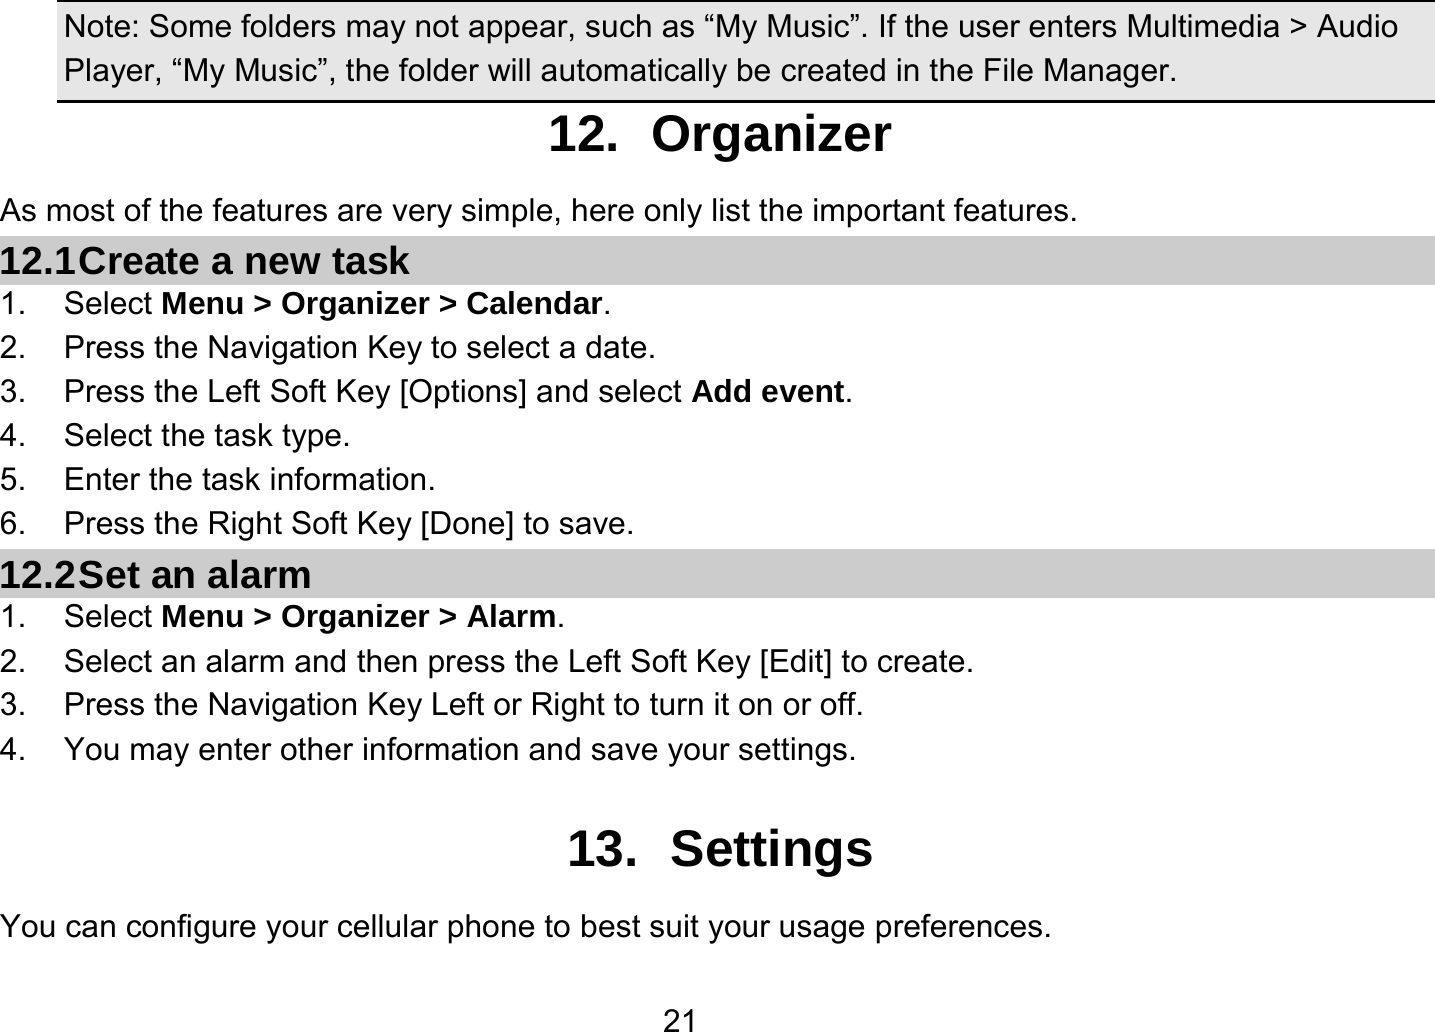   21Note: Some folders may not appear, such as “My Music”. If the user enters Multimedia &gt; Audio Player, “My Music”, the folder will automatically be created in the File Manager. 12. Organizer As most of the features are very simple, here only list the important features. 12.1 Create a new task 1. Select Menu &gt; Organizer &gt; Calendar. 2.  Press the Navigation Key to select a date. 3.  Press the Left Soft Key [Options] and select Add event. 4.  Select the task type. 5.  Enter the task information. 6.  Press the Right Soft Key [Done] to save. 12.2 Set an alarm 1. Select Menu &gt; Organizer &gt; Alarm. 2.  Select an alarm and then press the Left Soft Key [Edit] to create. 3.  Press the Navigation Key Left or Right to turn it on or off. 4.  You may enter other information and save your settings.  13. Settings You can configure your cellular phone to best suit your usage preferences. 